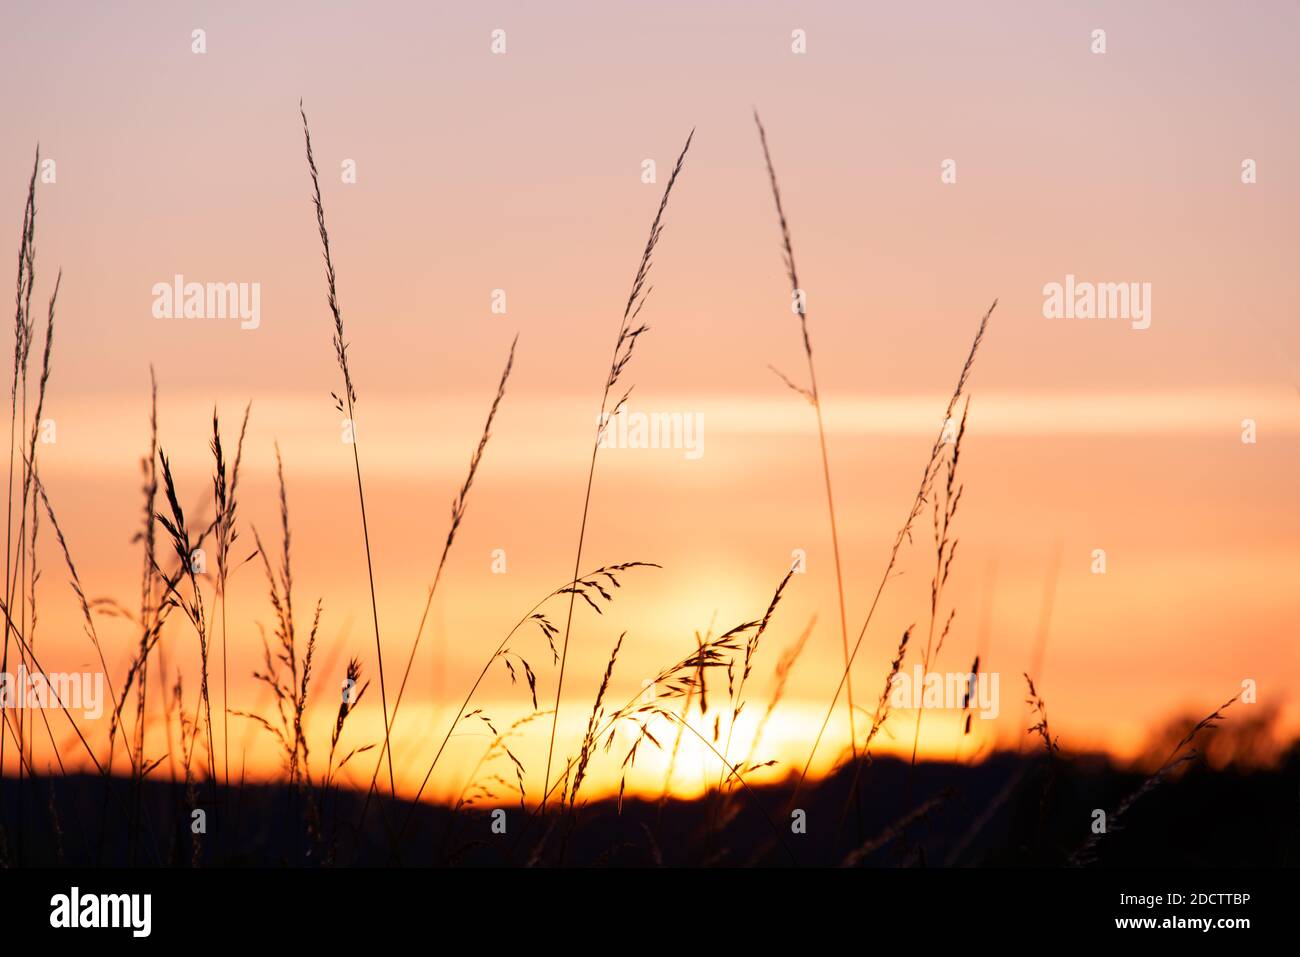 Weed grass silhouette at sunset in summer, pink sky background Stock Photo